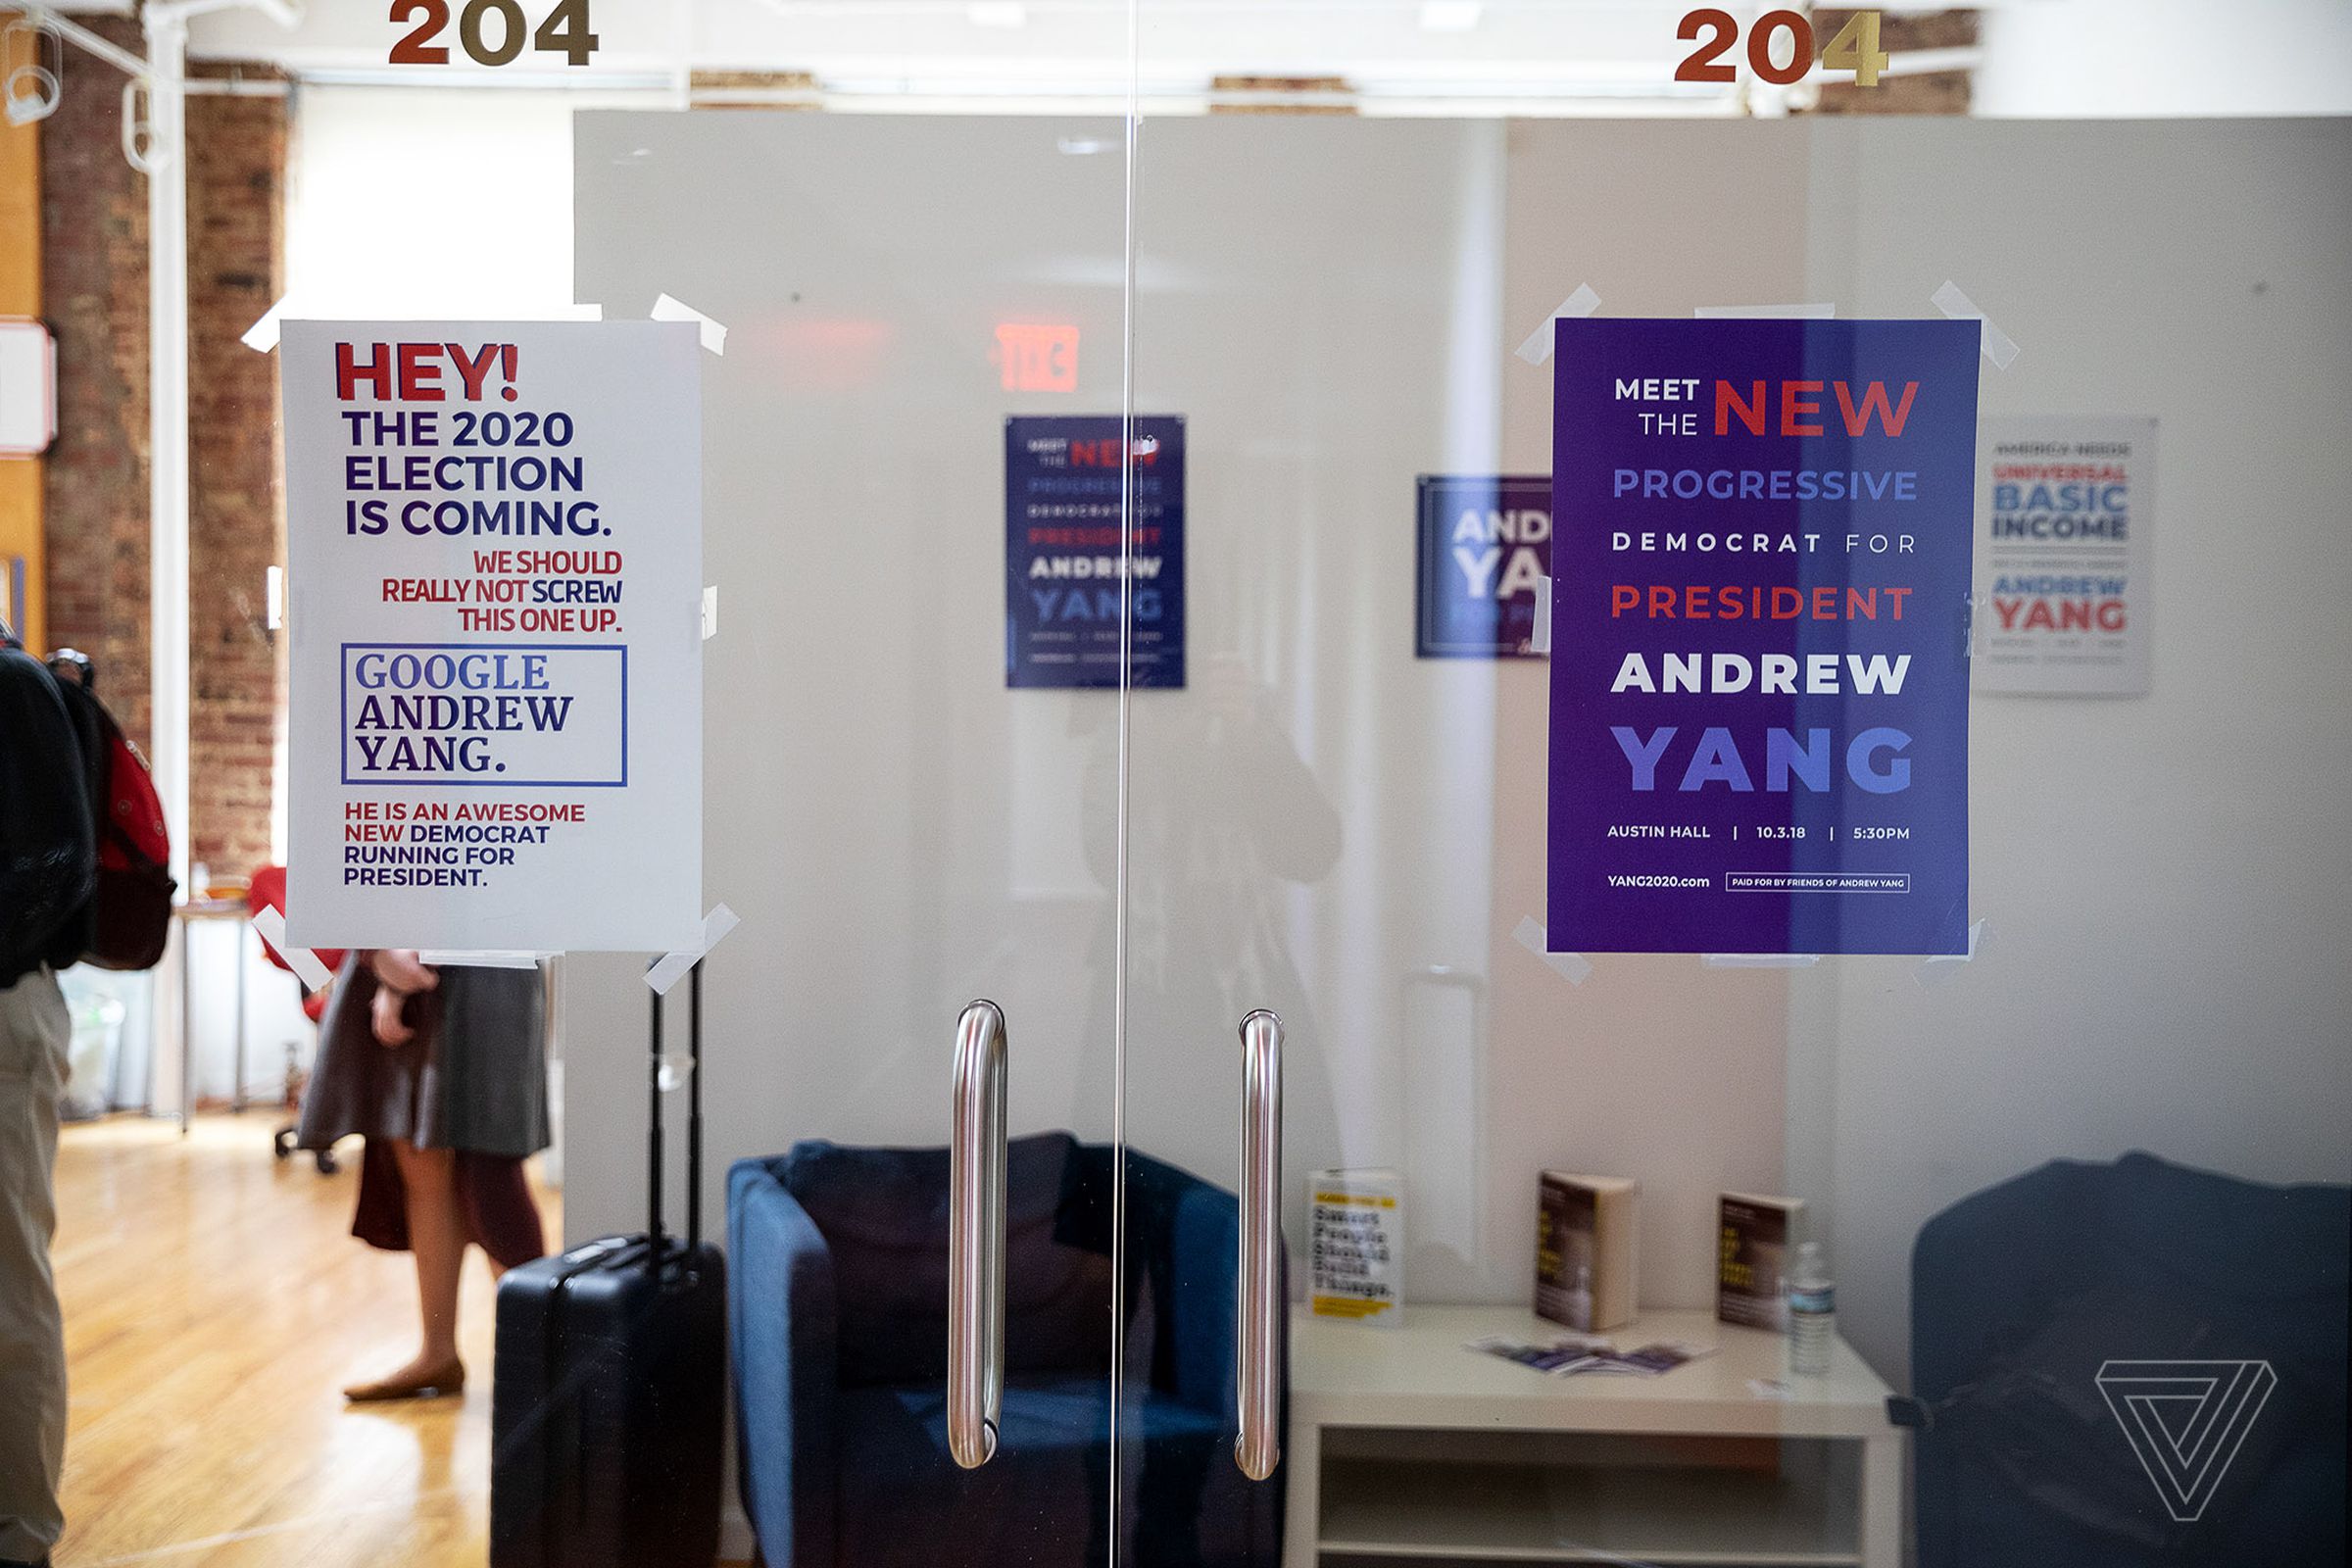 One of Yang’s campaign posters tells curious voters to “Google Andrew Yang.”